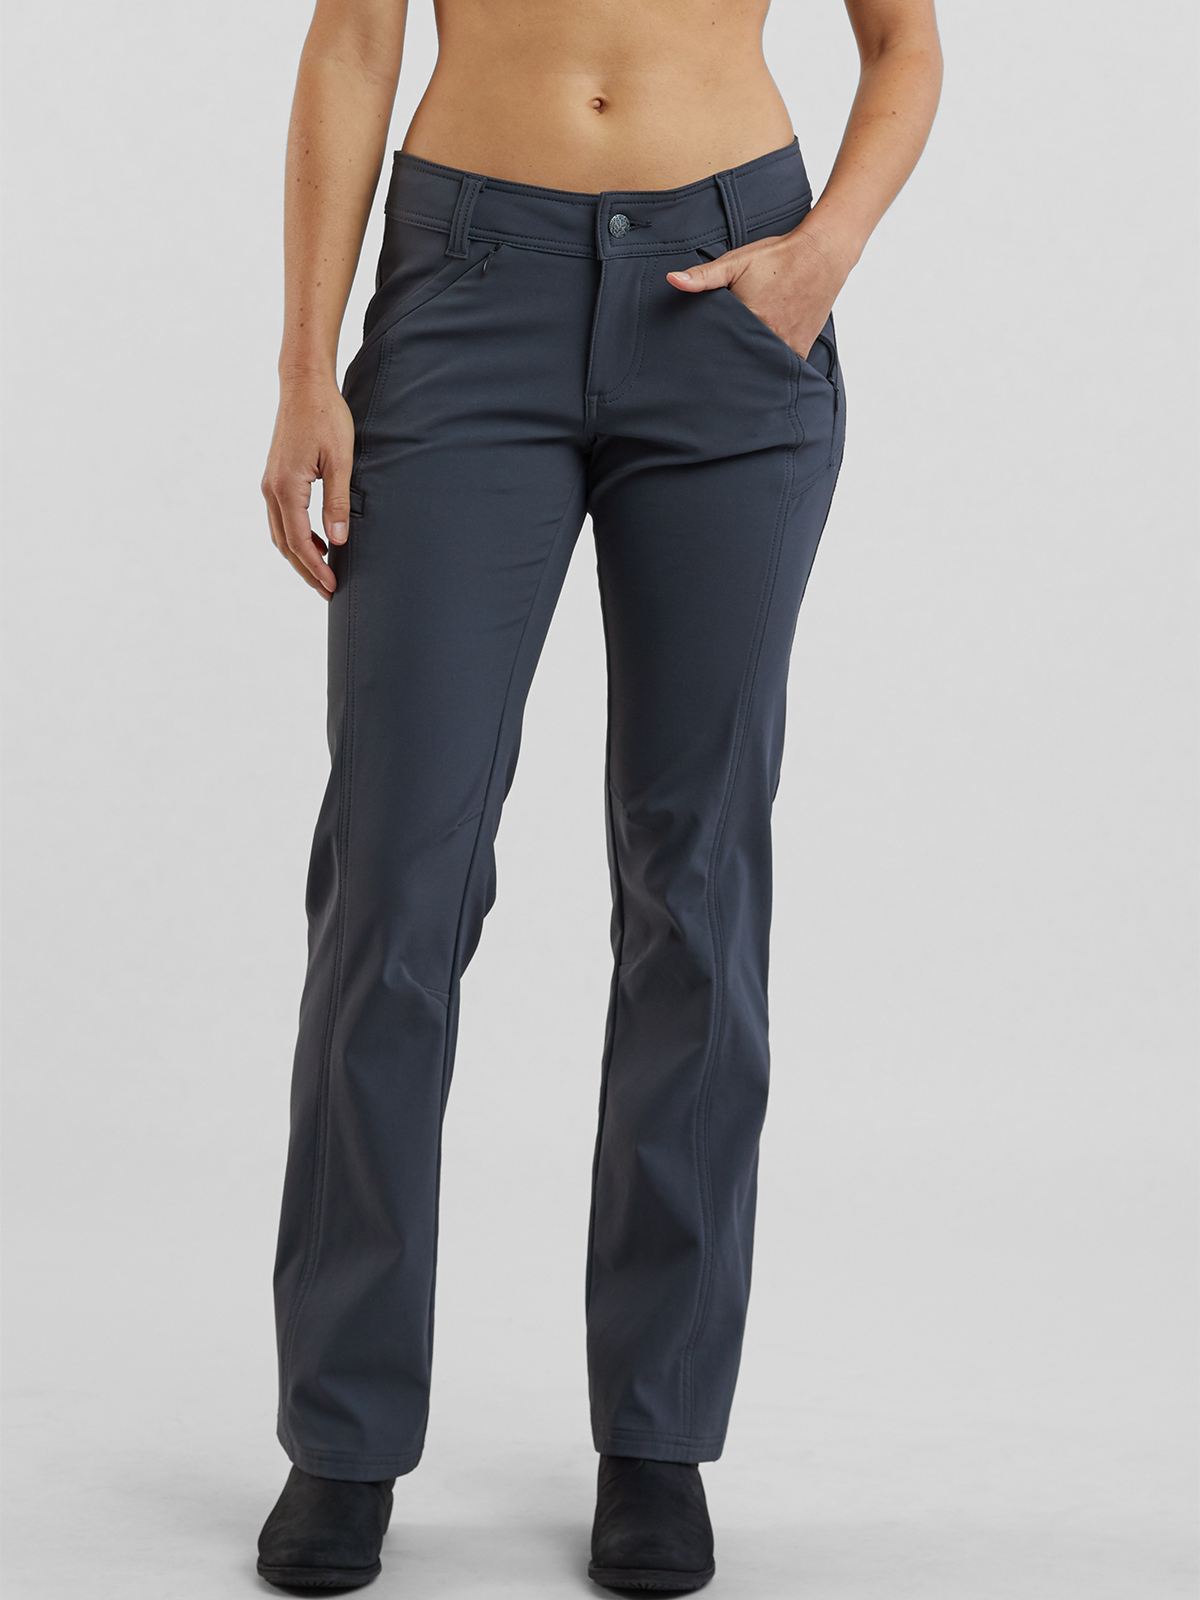 Women's Hiking Pants for Winter by Prana